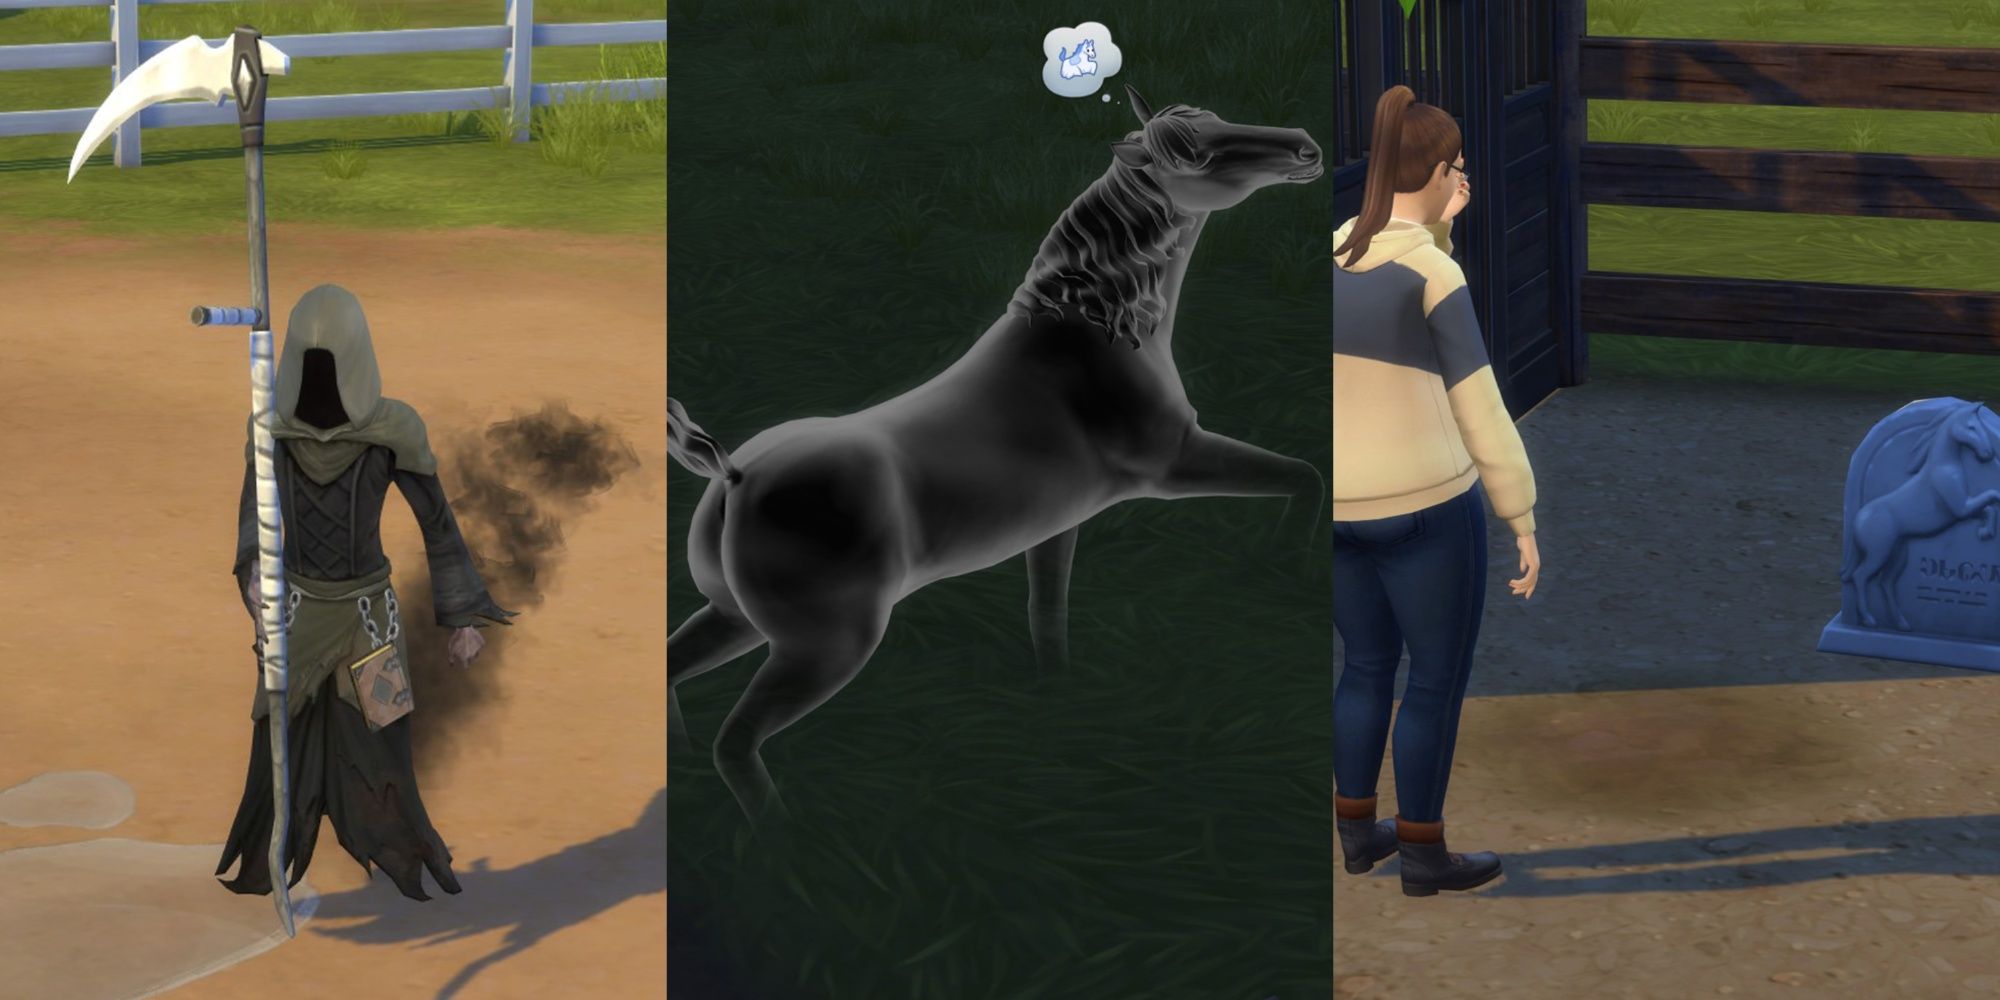 Sims 4 Horse Ranch cheats: How to max out horse skills, Nectar making & more